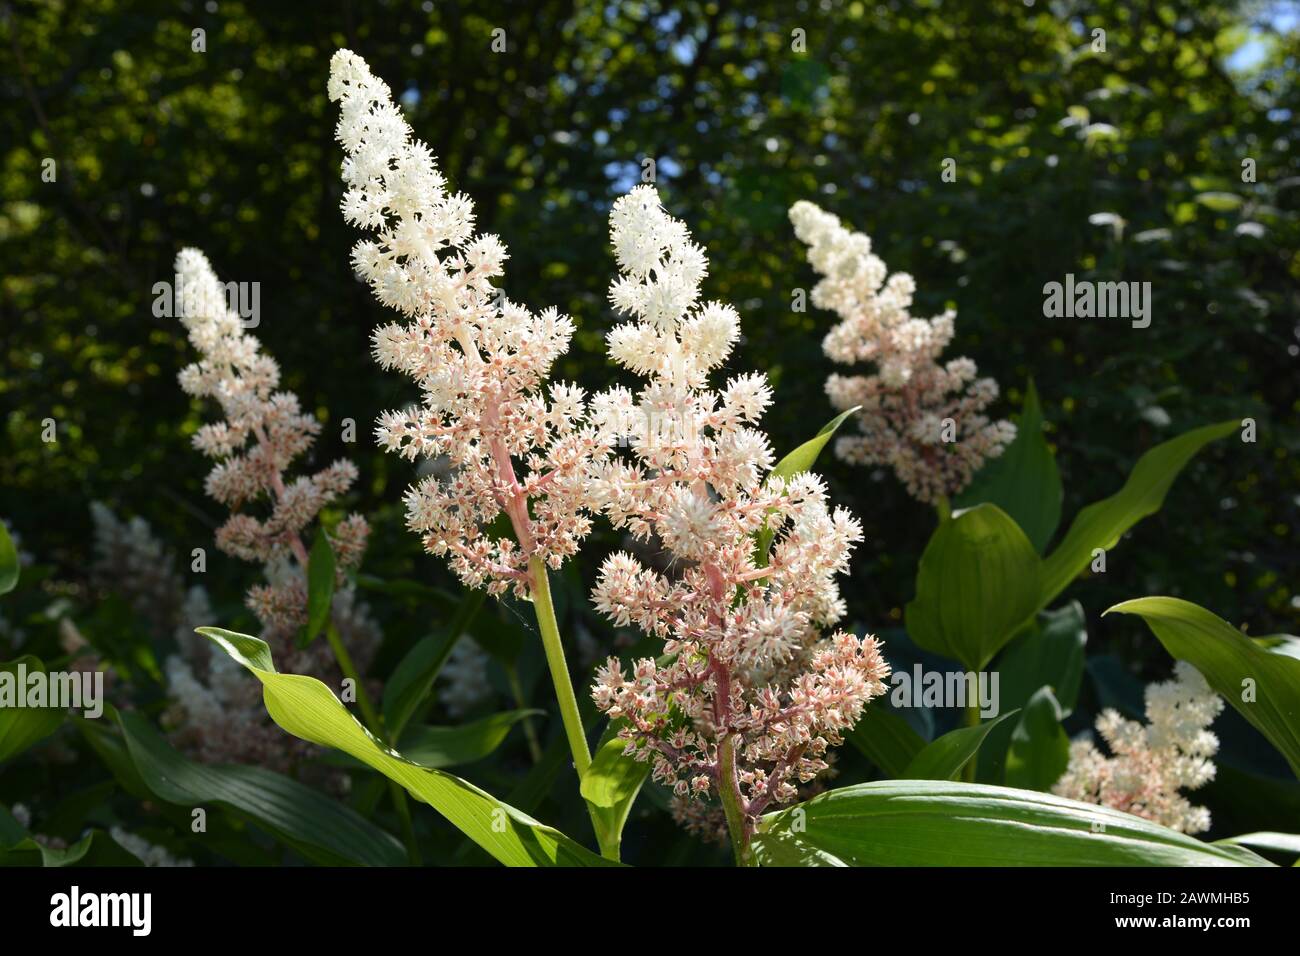 False Solomon's Seal, also known as Maianthemum racemosum, in flower Stock Photo